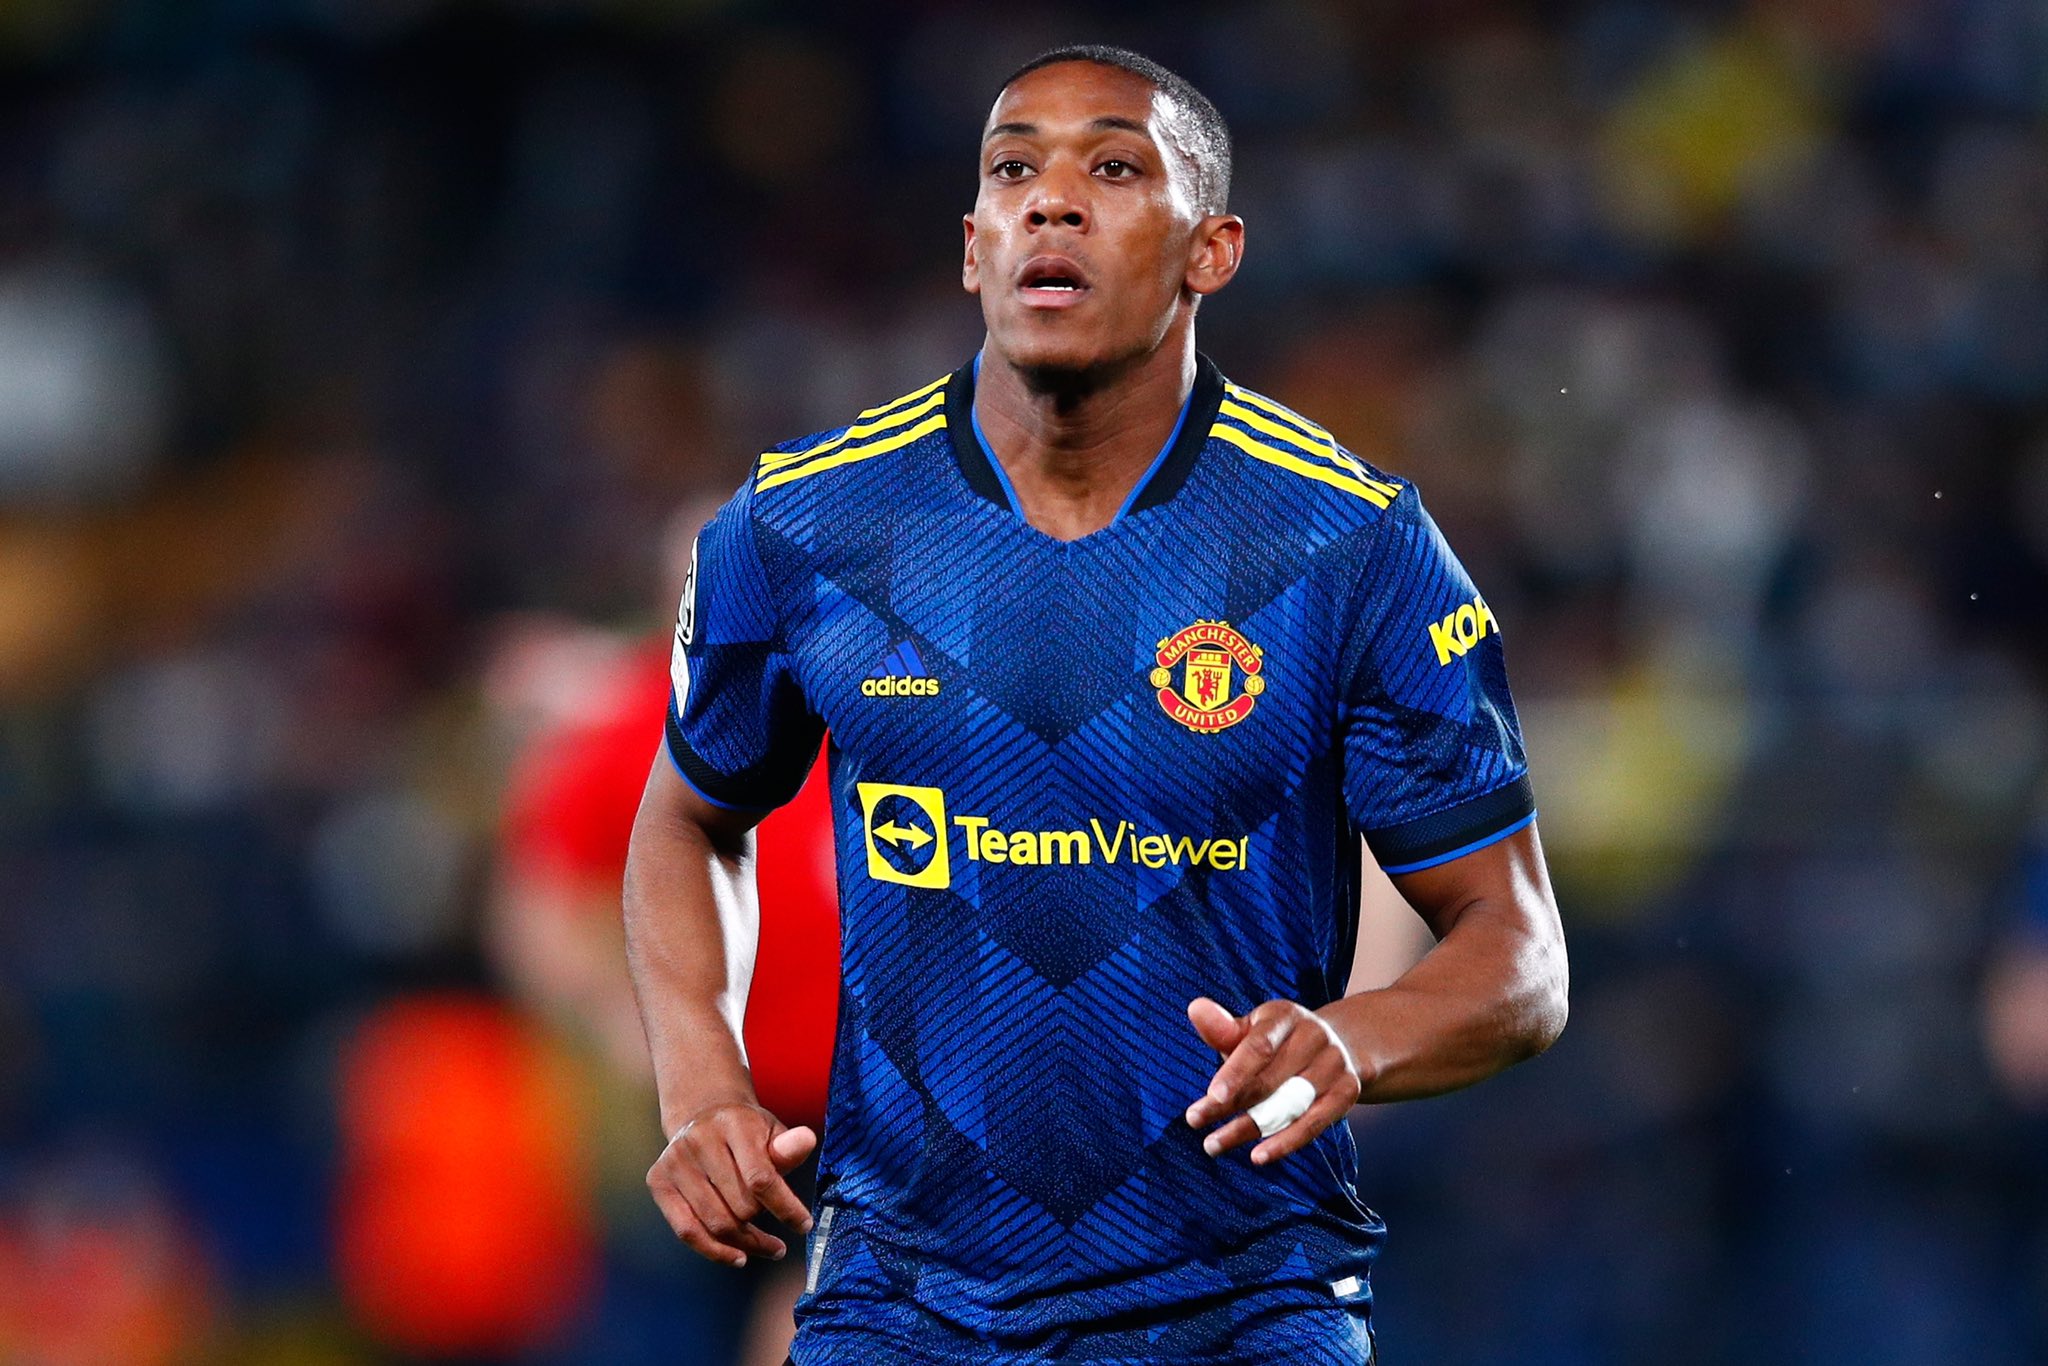 Have regularly played injured over last two seasons but people don’t know, admits Anthony Martial